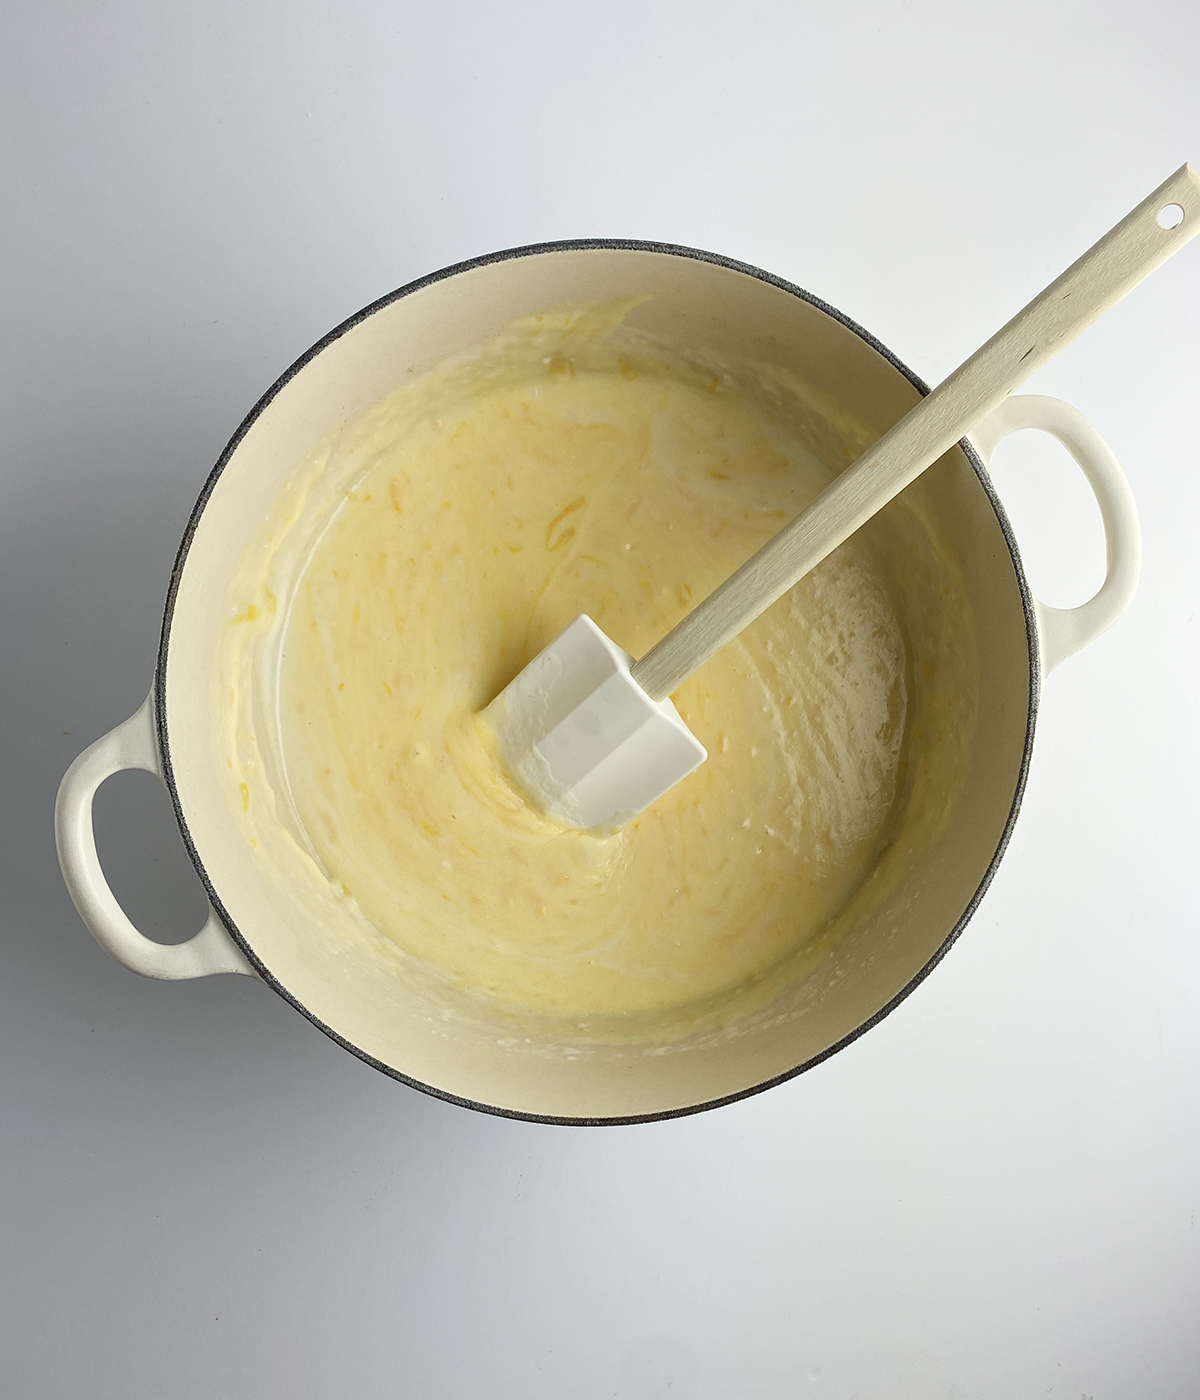 Cheese sauce in a Dutch oven.